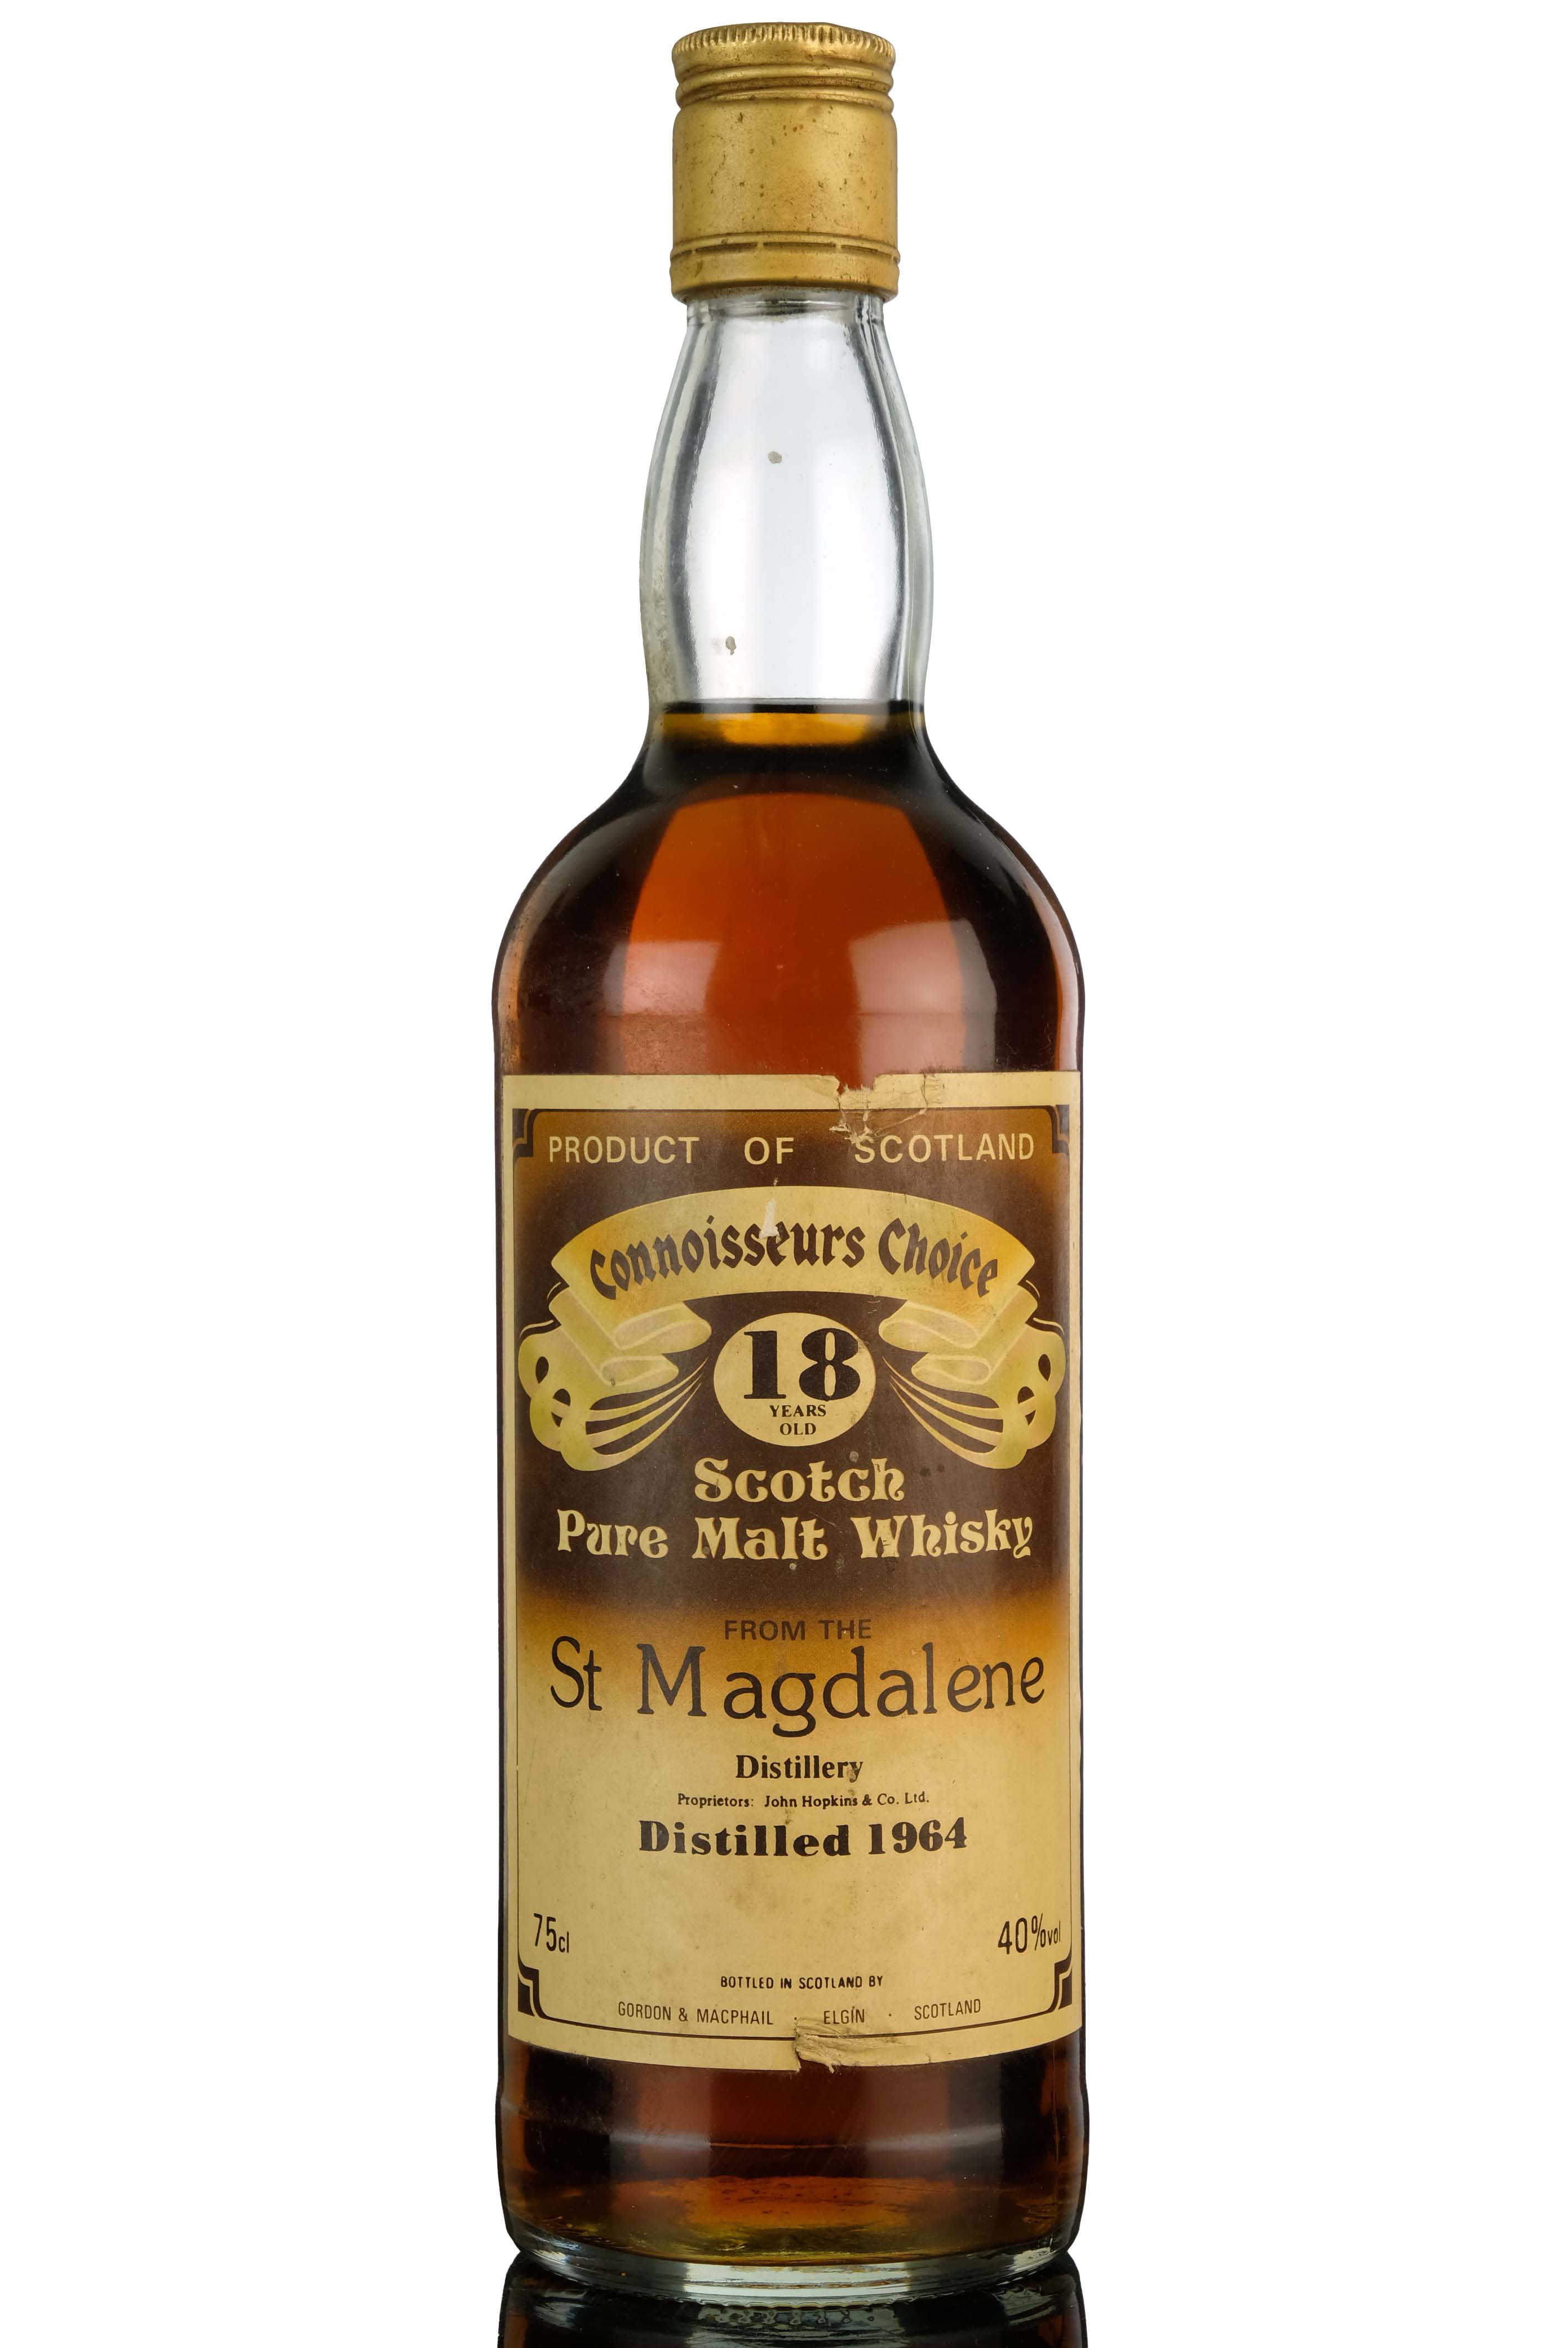 St Magdalene 1964 - 18 Year Old - Connoisseurs Choice